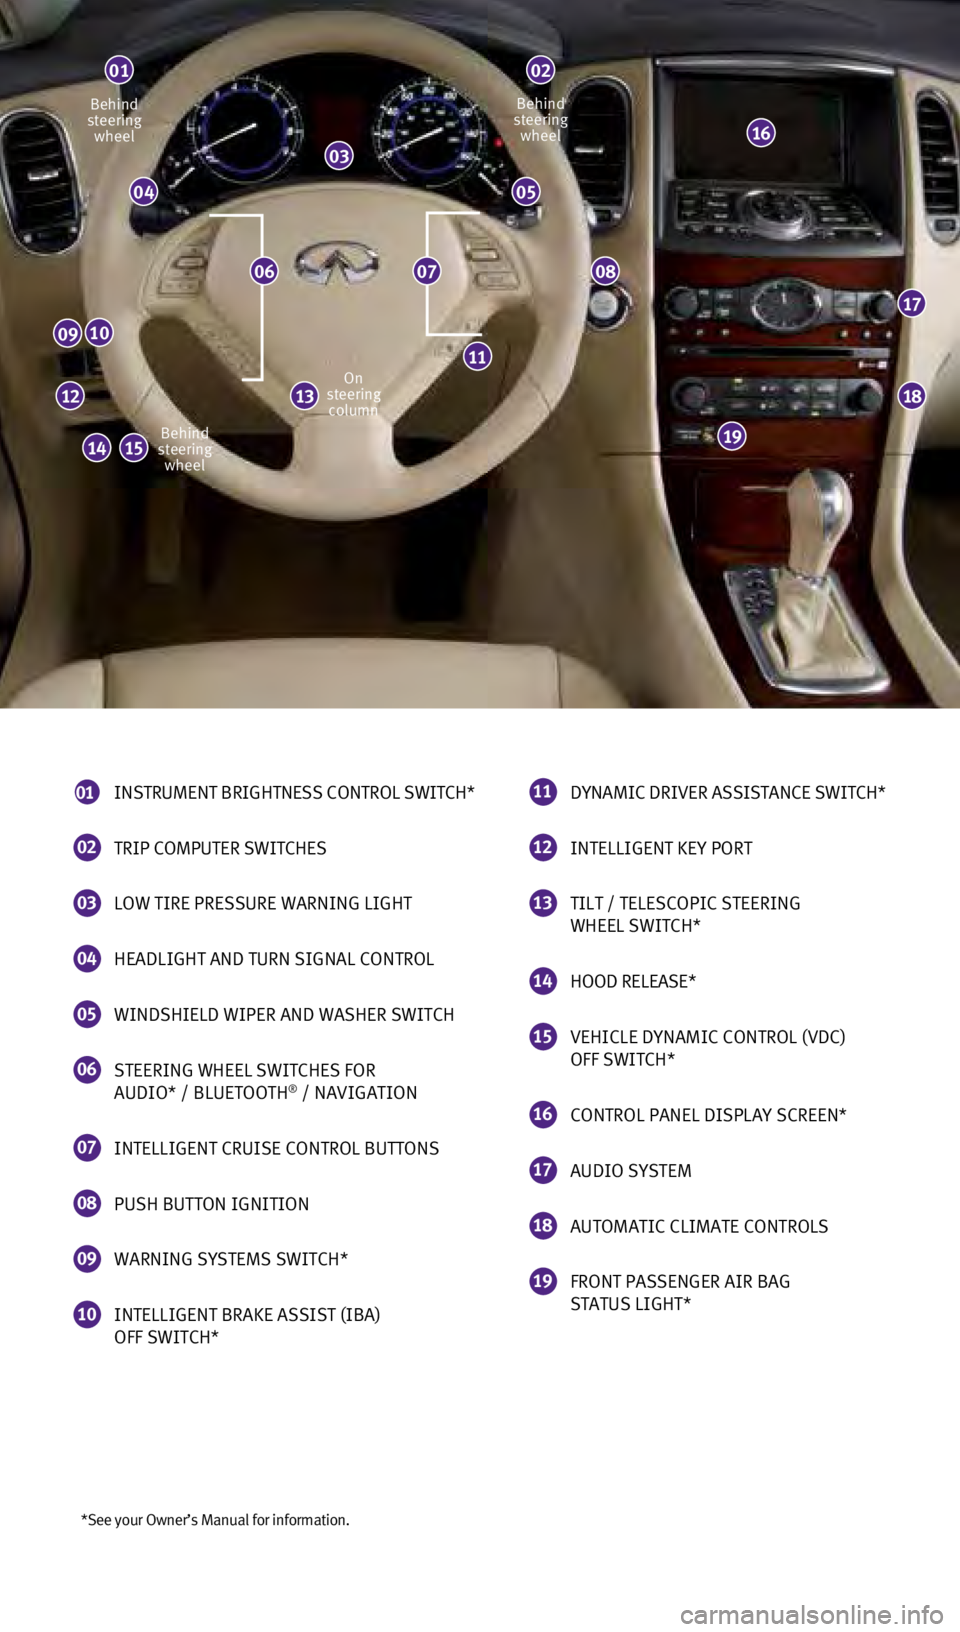 INFINITI QX50 2014  Quick Reference Guide *See your Owner’s Manual for information.
01
Behind 
steering  wheel Behind 
steering  wheel
On 
steering  column
0405
08
0910
16
17
18
19
11
1213
14
02
03
0706
15Behind 
steering  wheel
01  INSTRUM